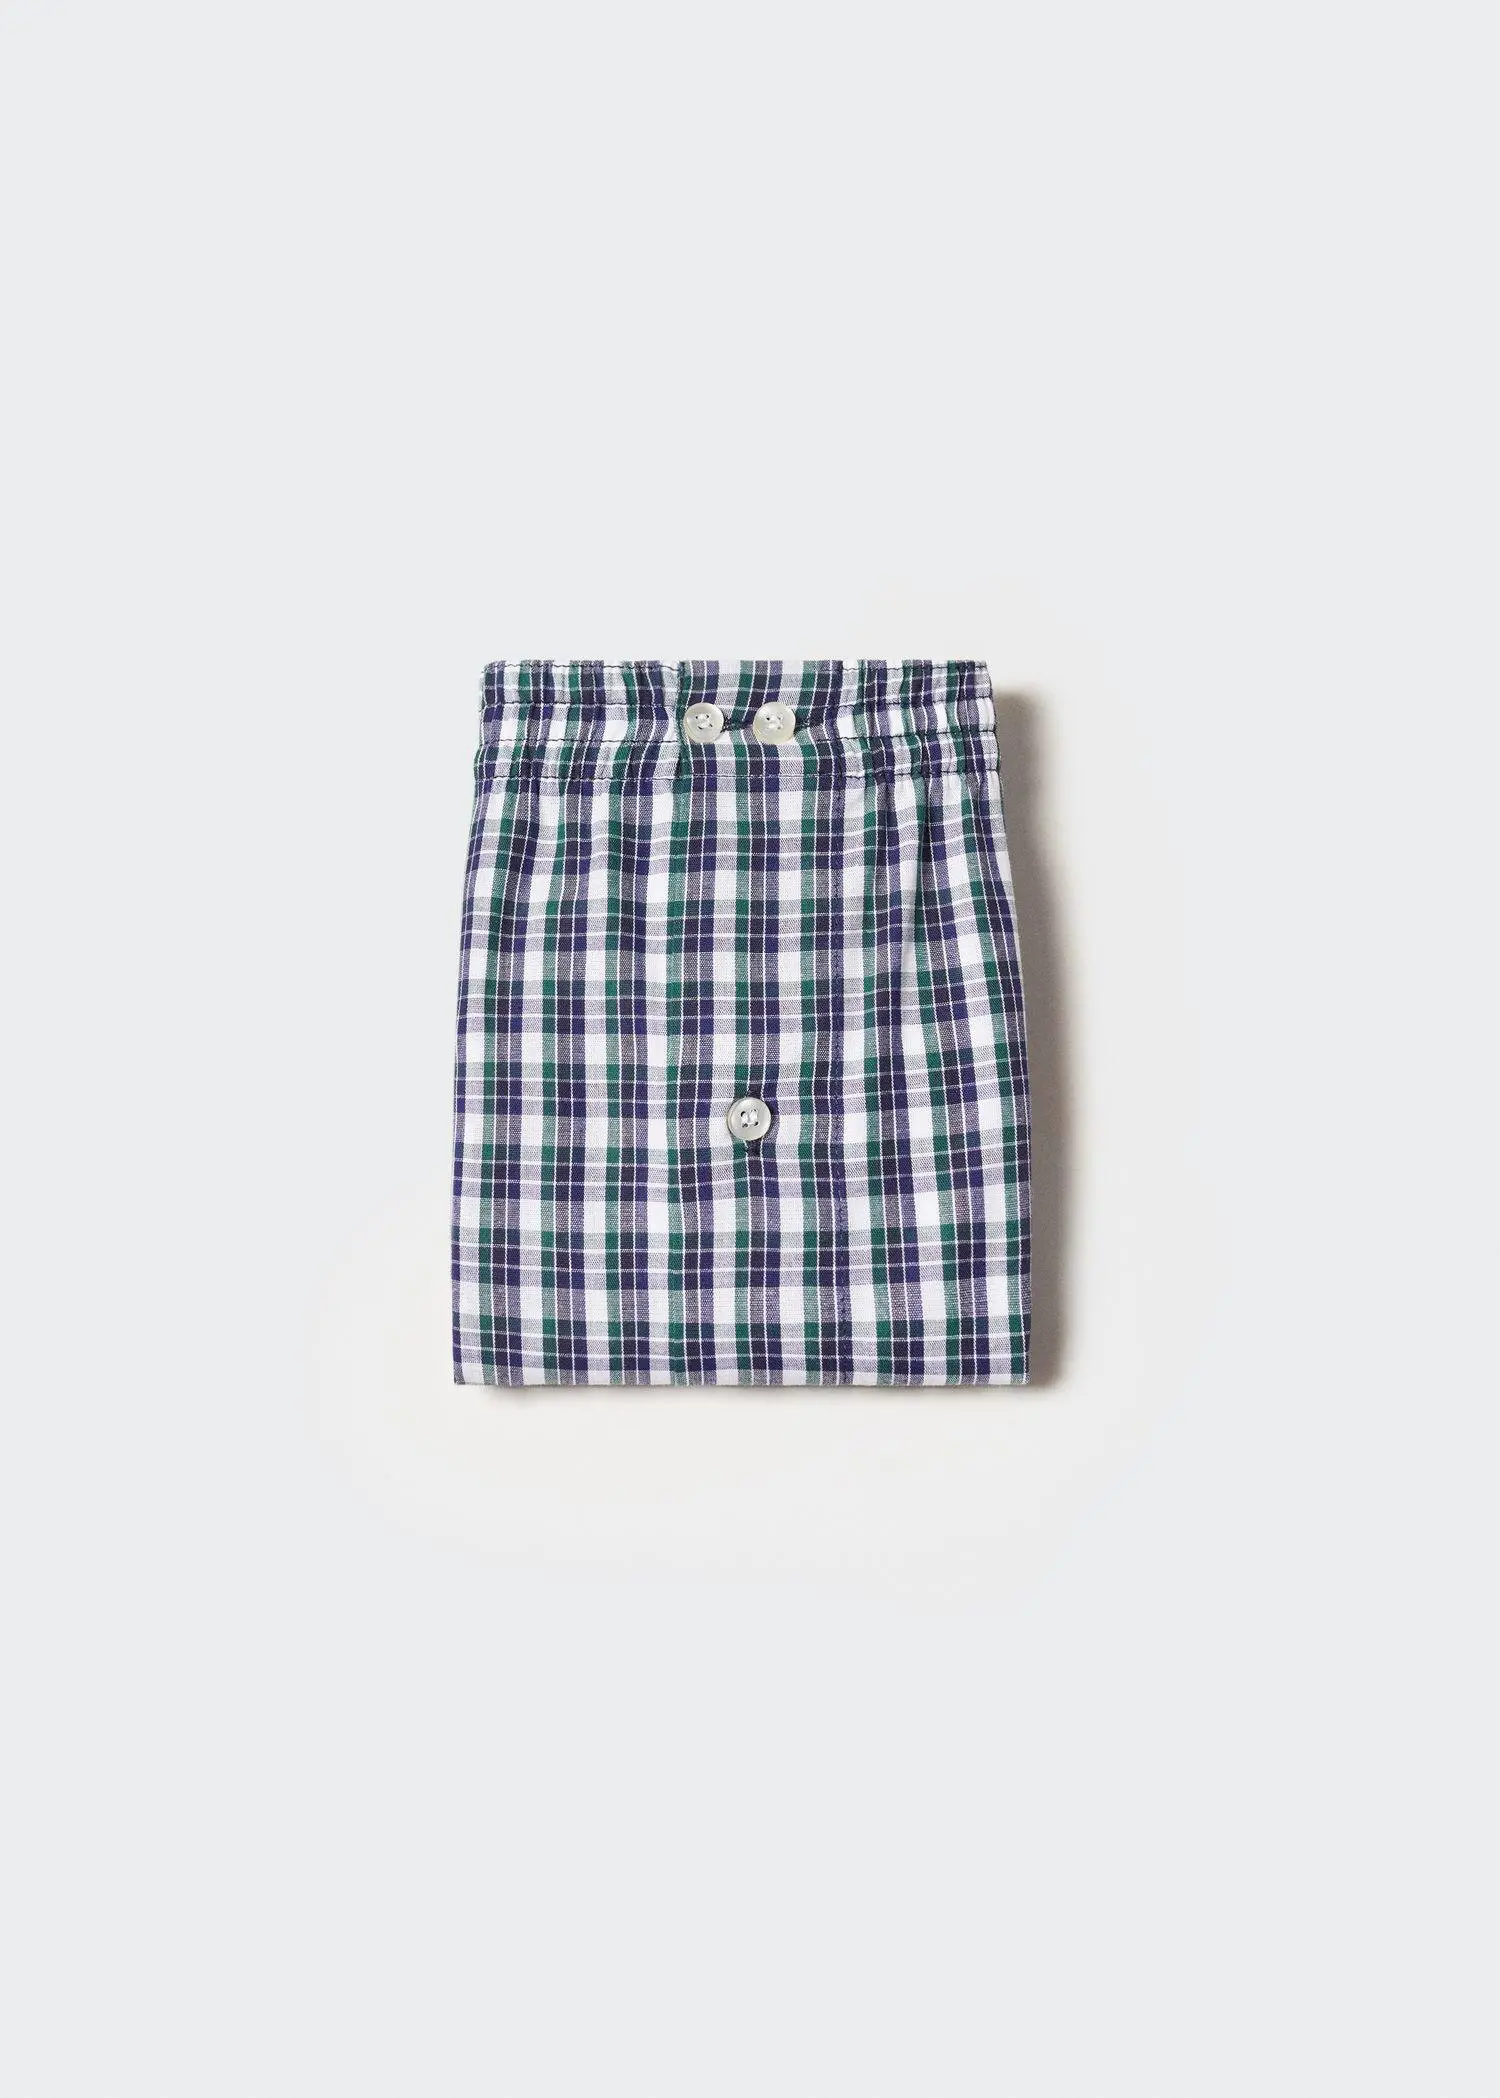 Mango Gingham check cotton briefs. a close up of a pair of boxers 